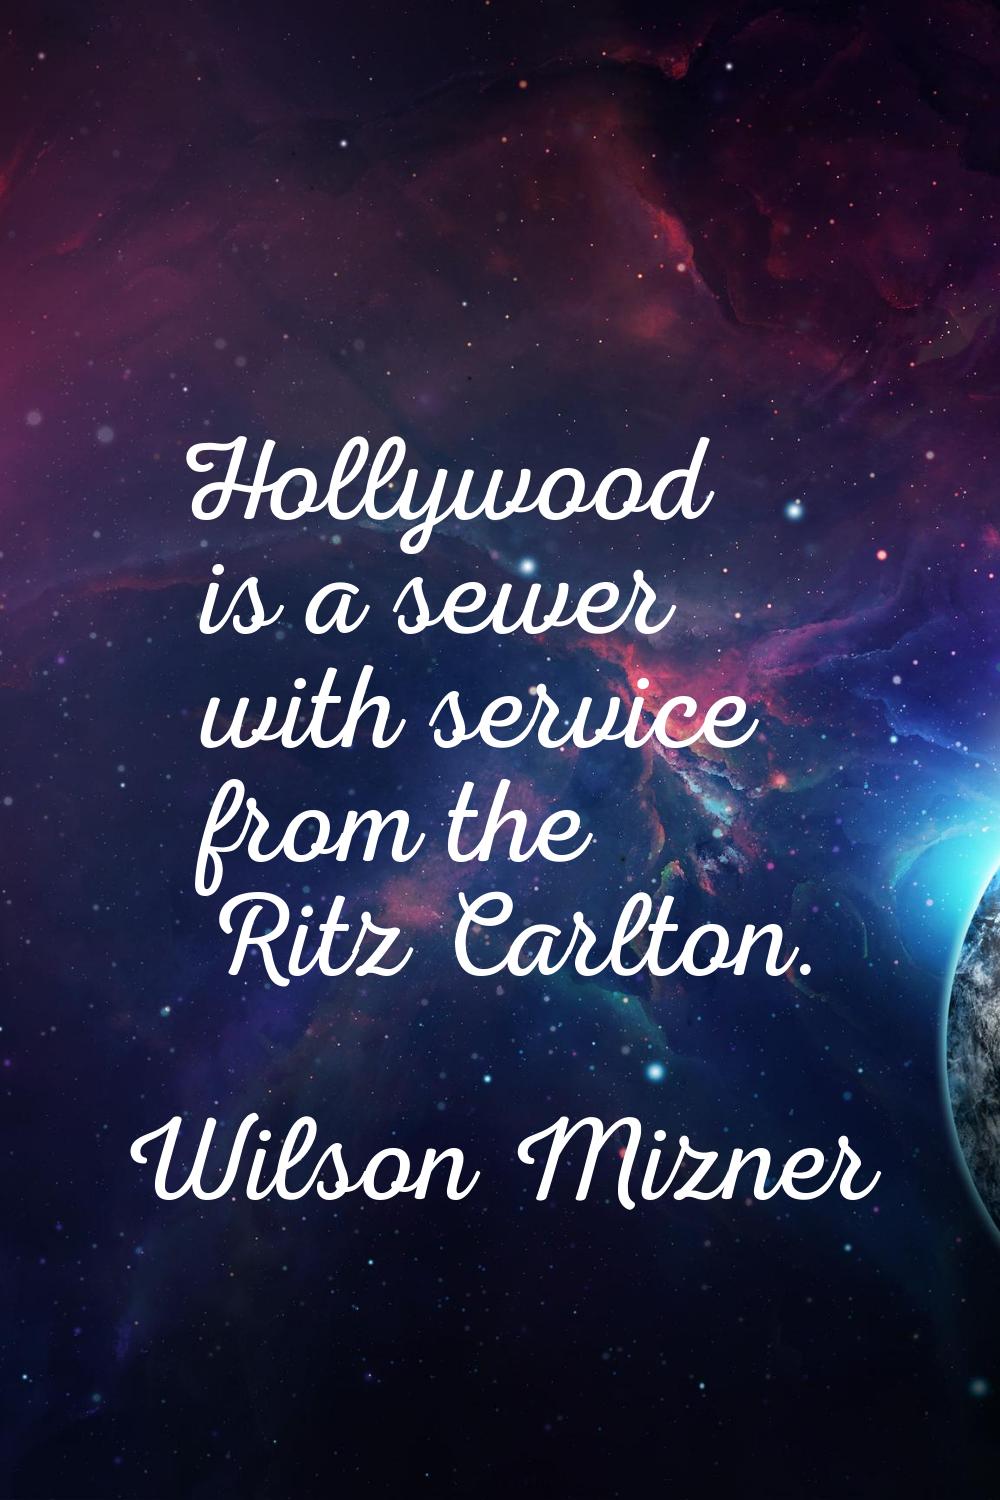 Hollywood is a sewer with service from the Ritz Carlton.